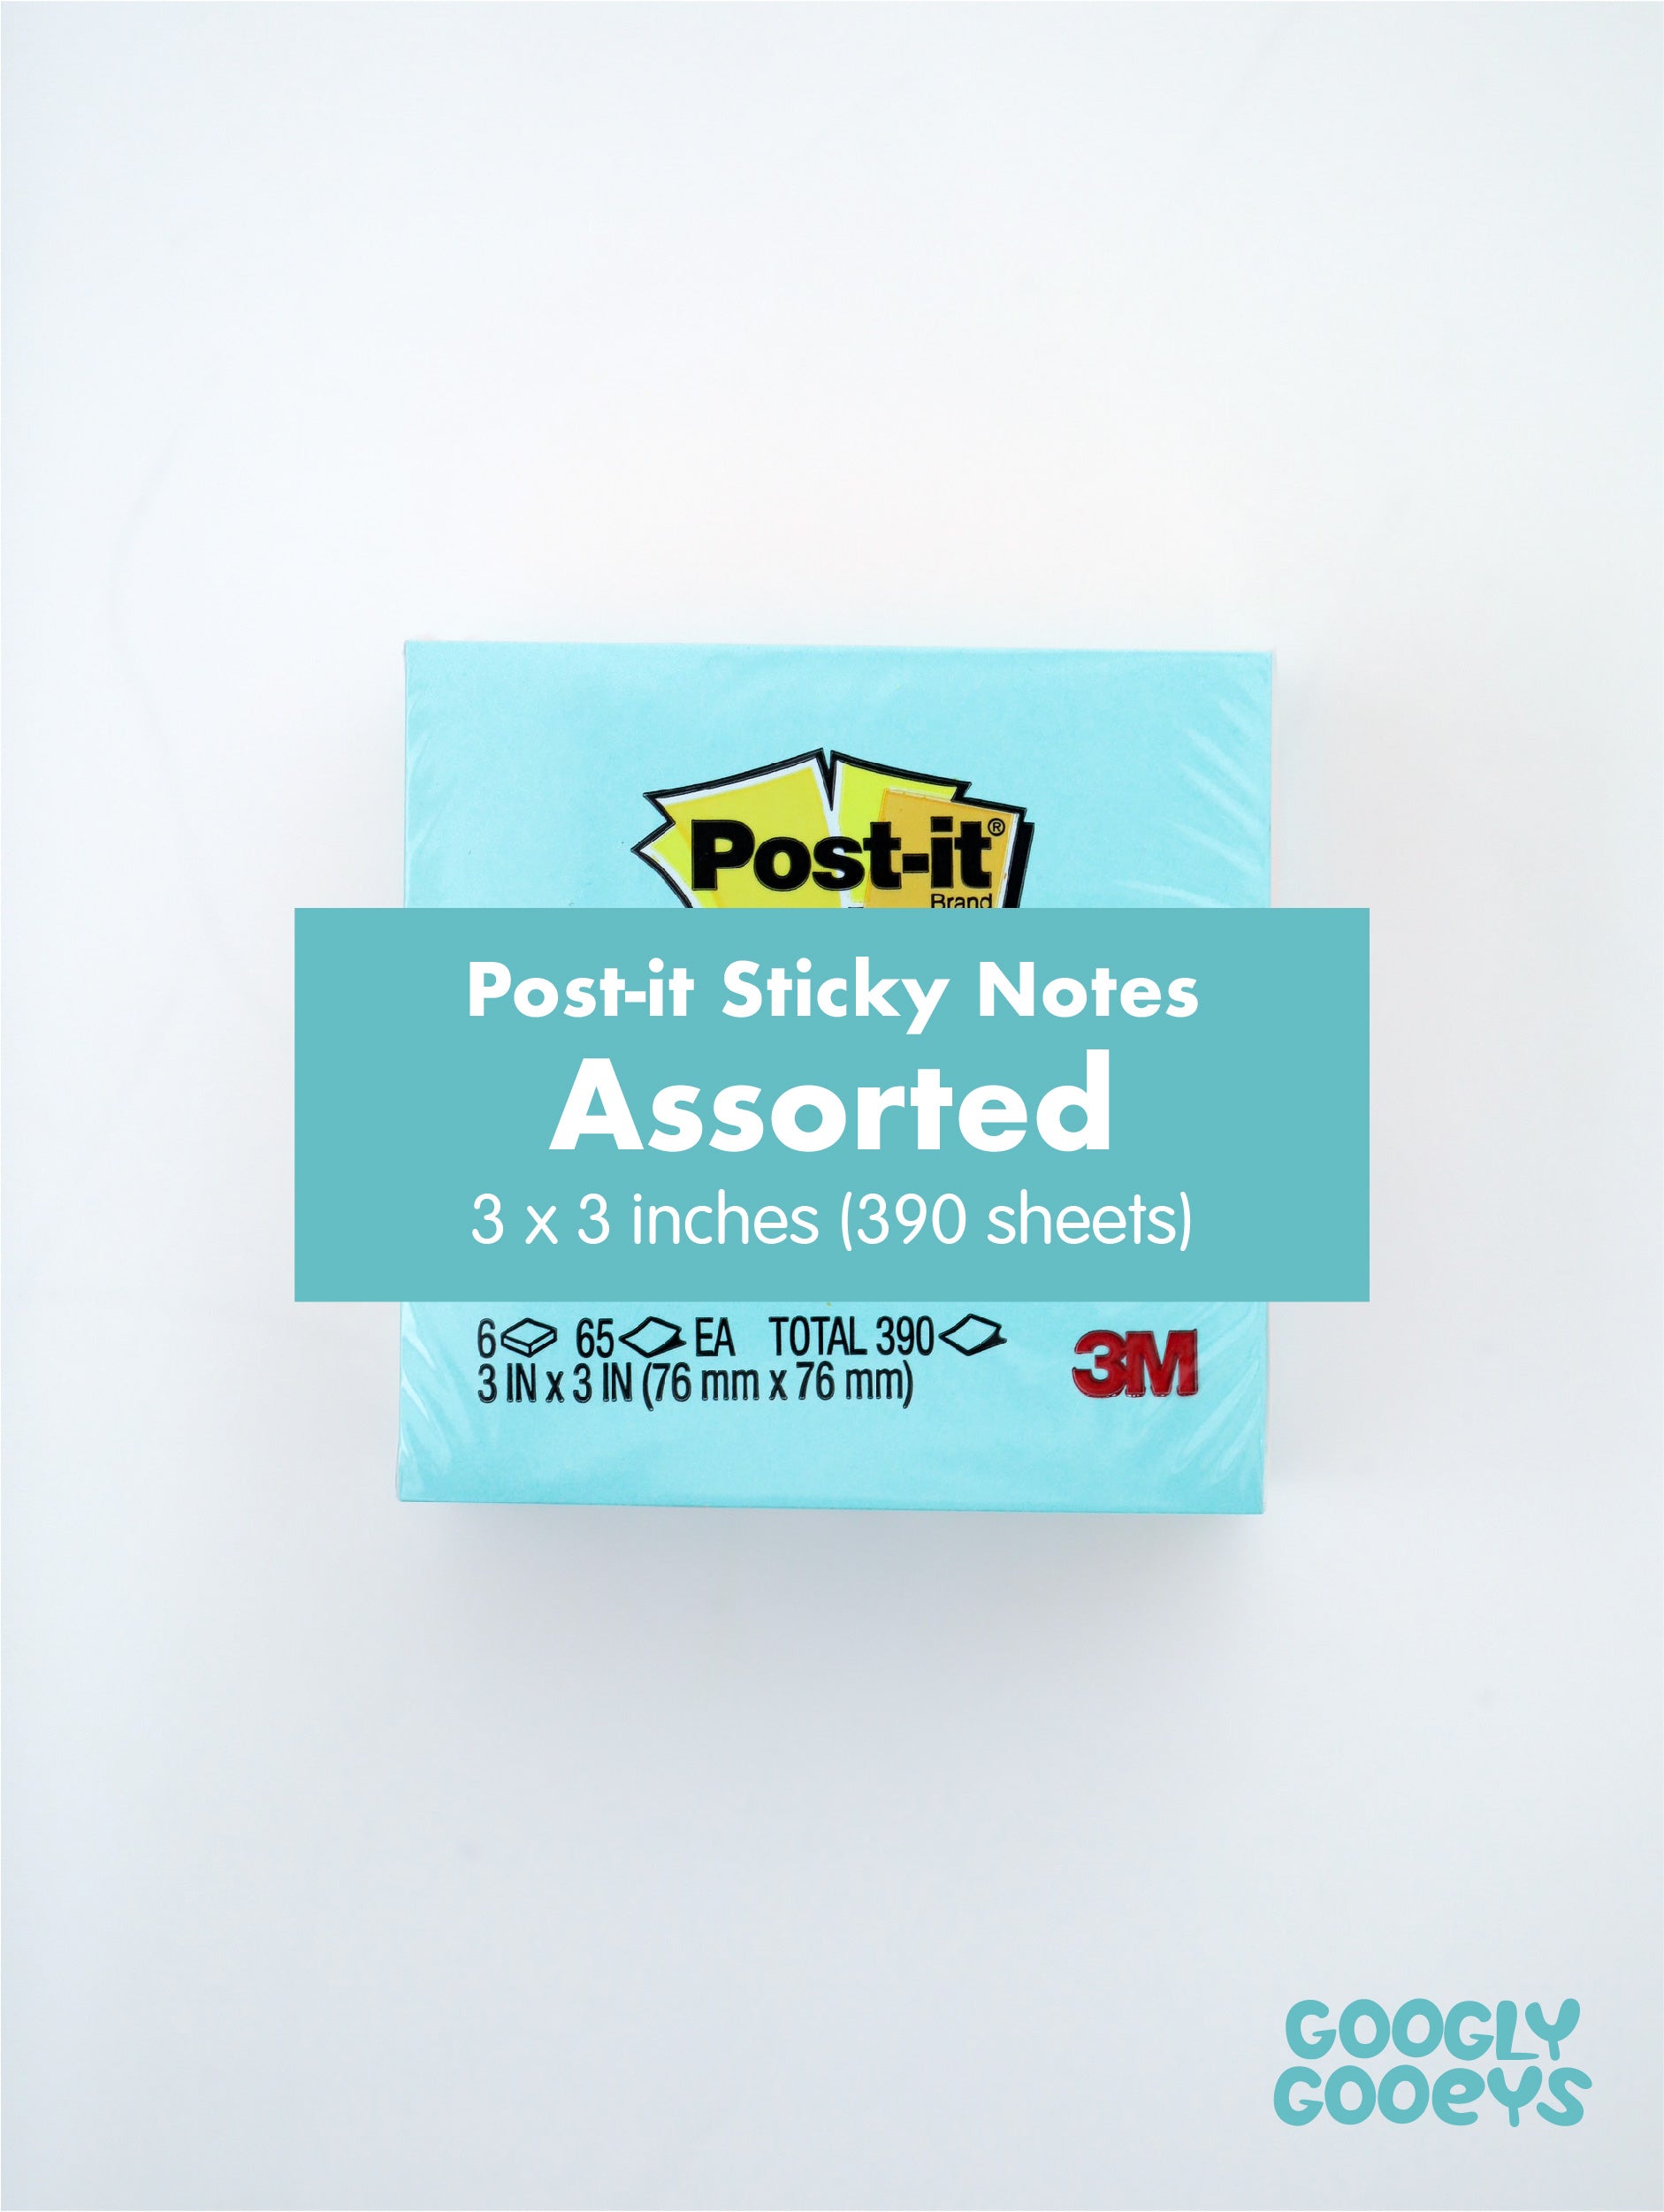 Post-it Super Sticky Notes Assorted 3x3 inches